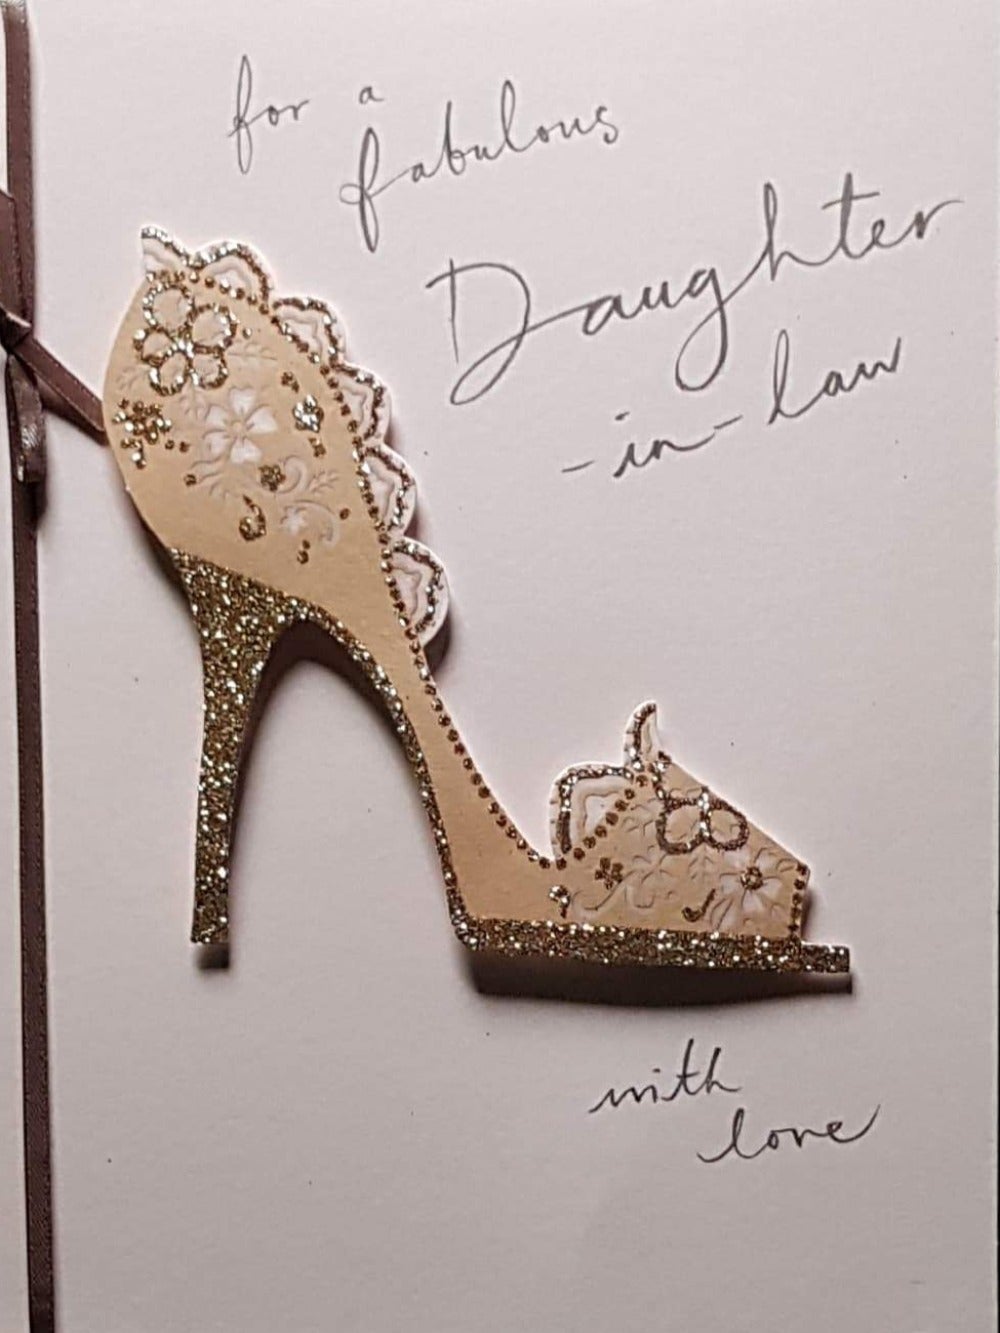 Birthday Card - Daughter In Law / A Floral Brown Shoe